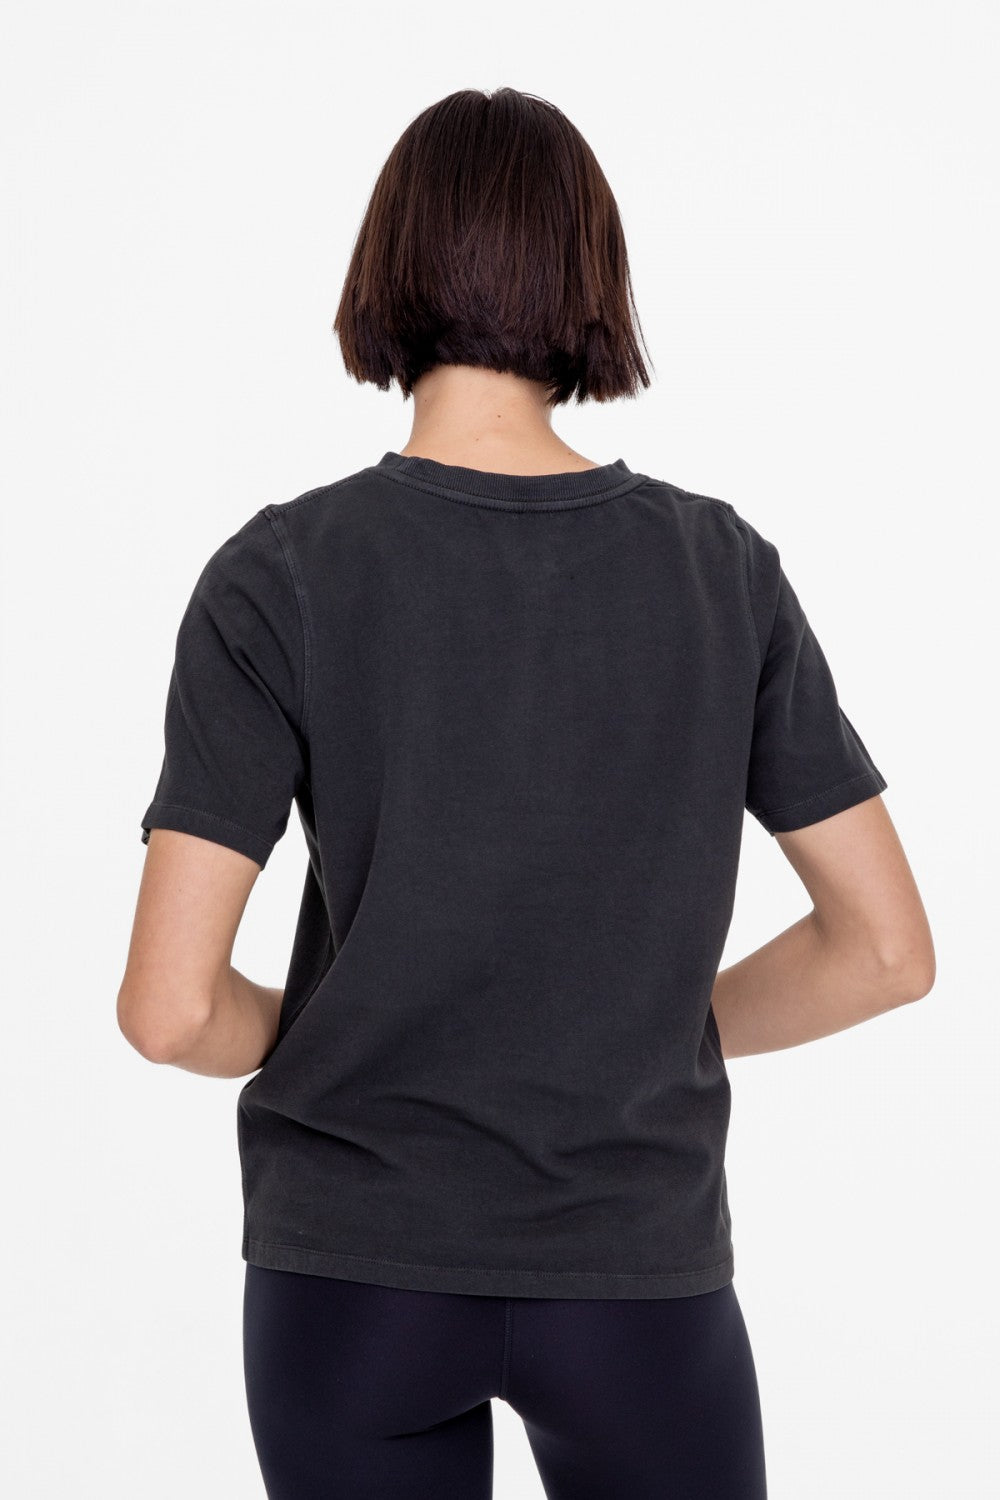 A tried and true classic. This simple tee is made with supima cotton that is pigment dyed for a rich color and features a boxy fit and ribbed neckline.